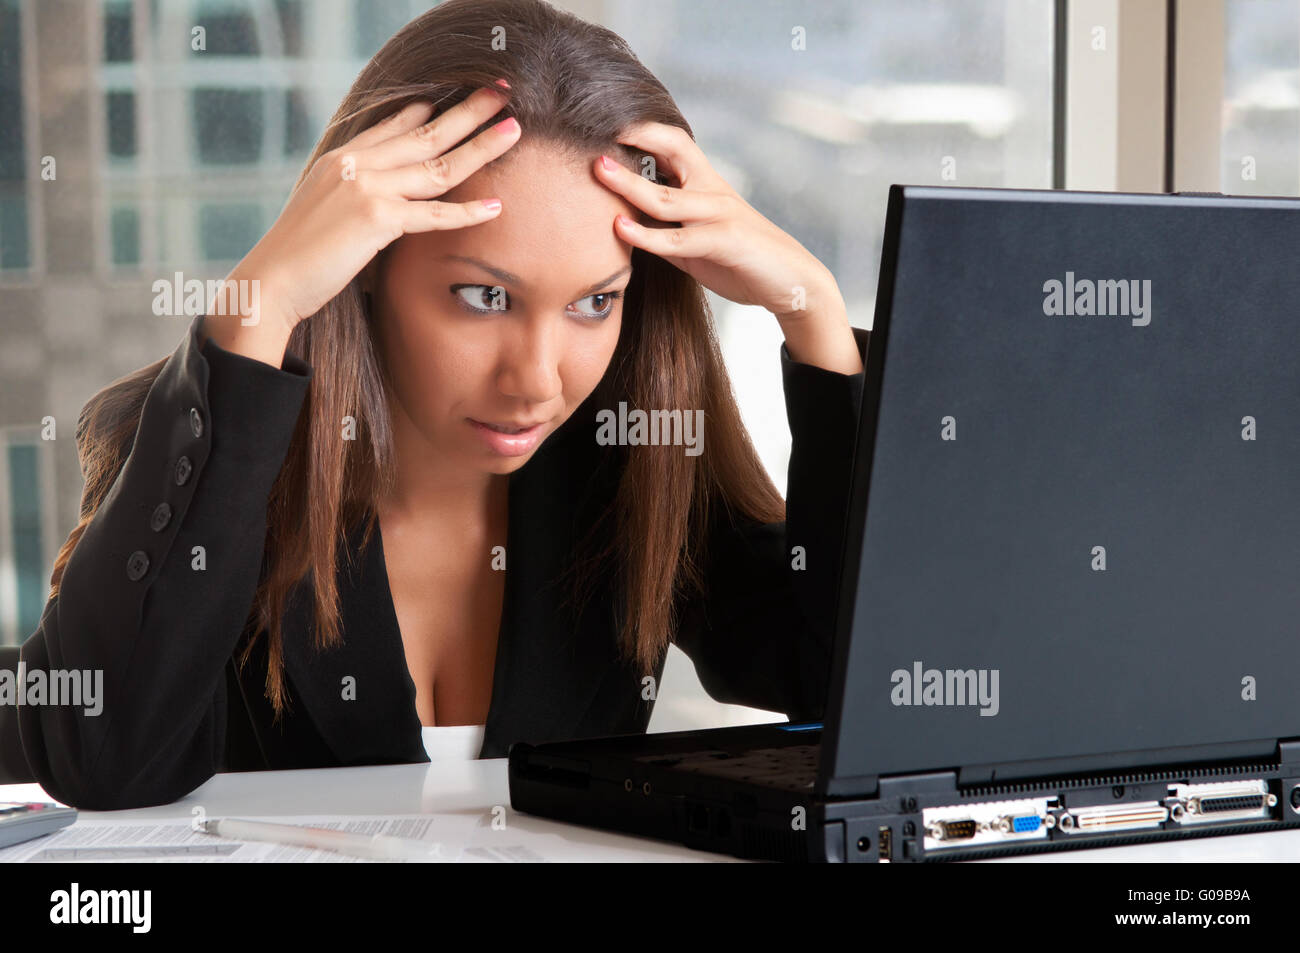 Worried Woman Looking At A Computer Monitor Stock Photo